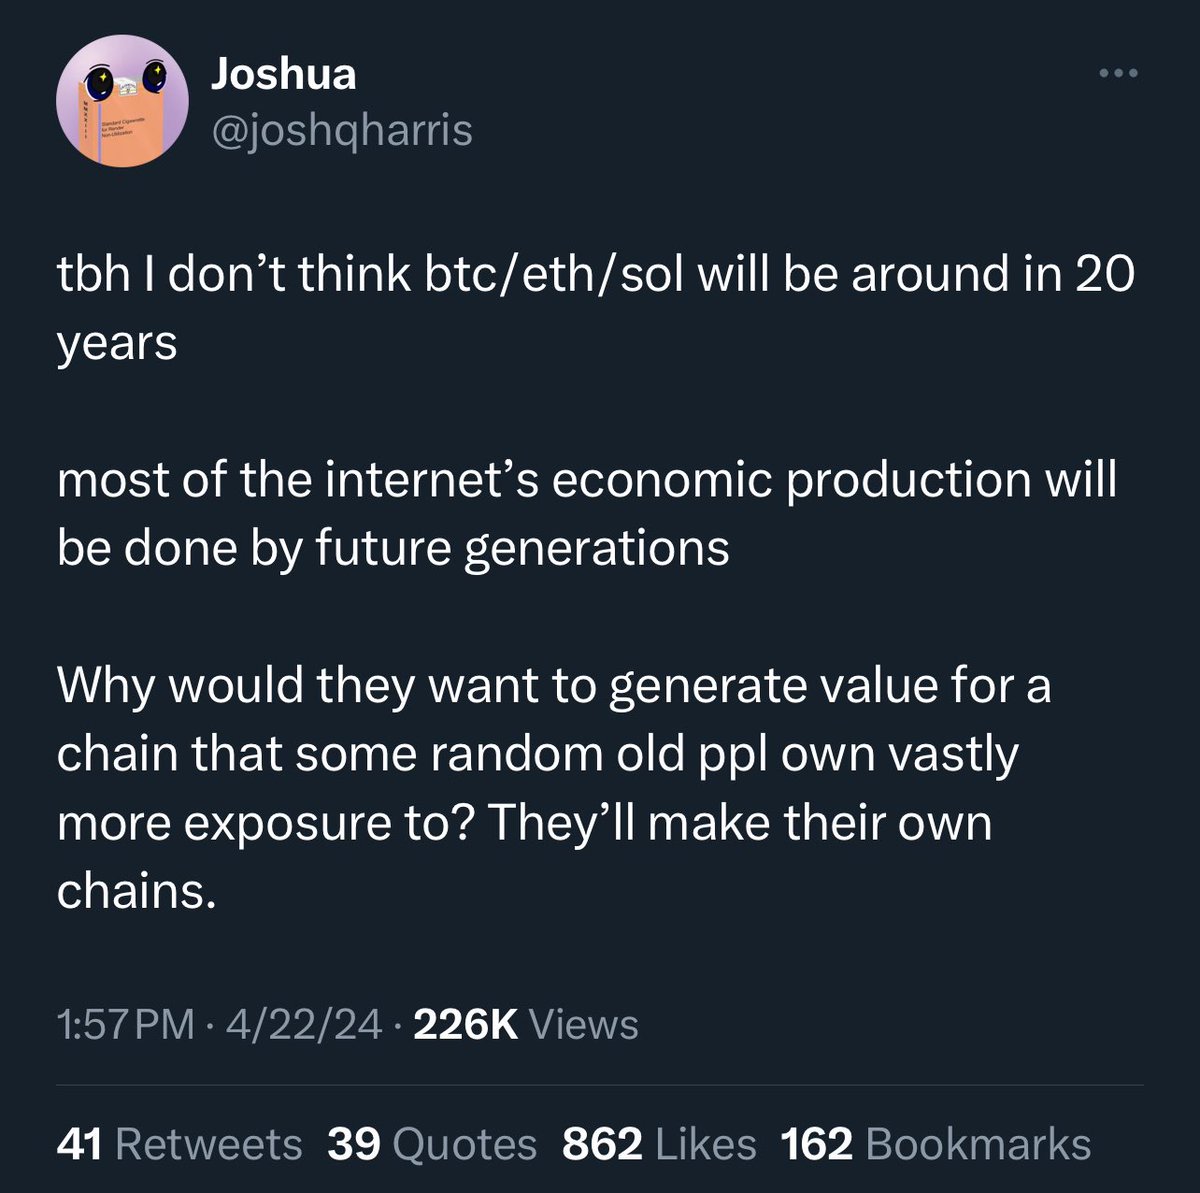 he's closing in on 1000 likes on 'all majors die' no ratio either ct has no coins, send them higher